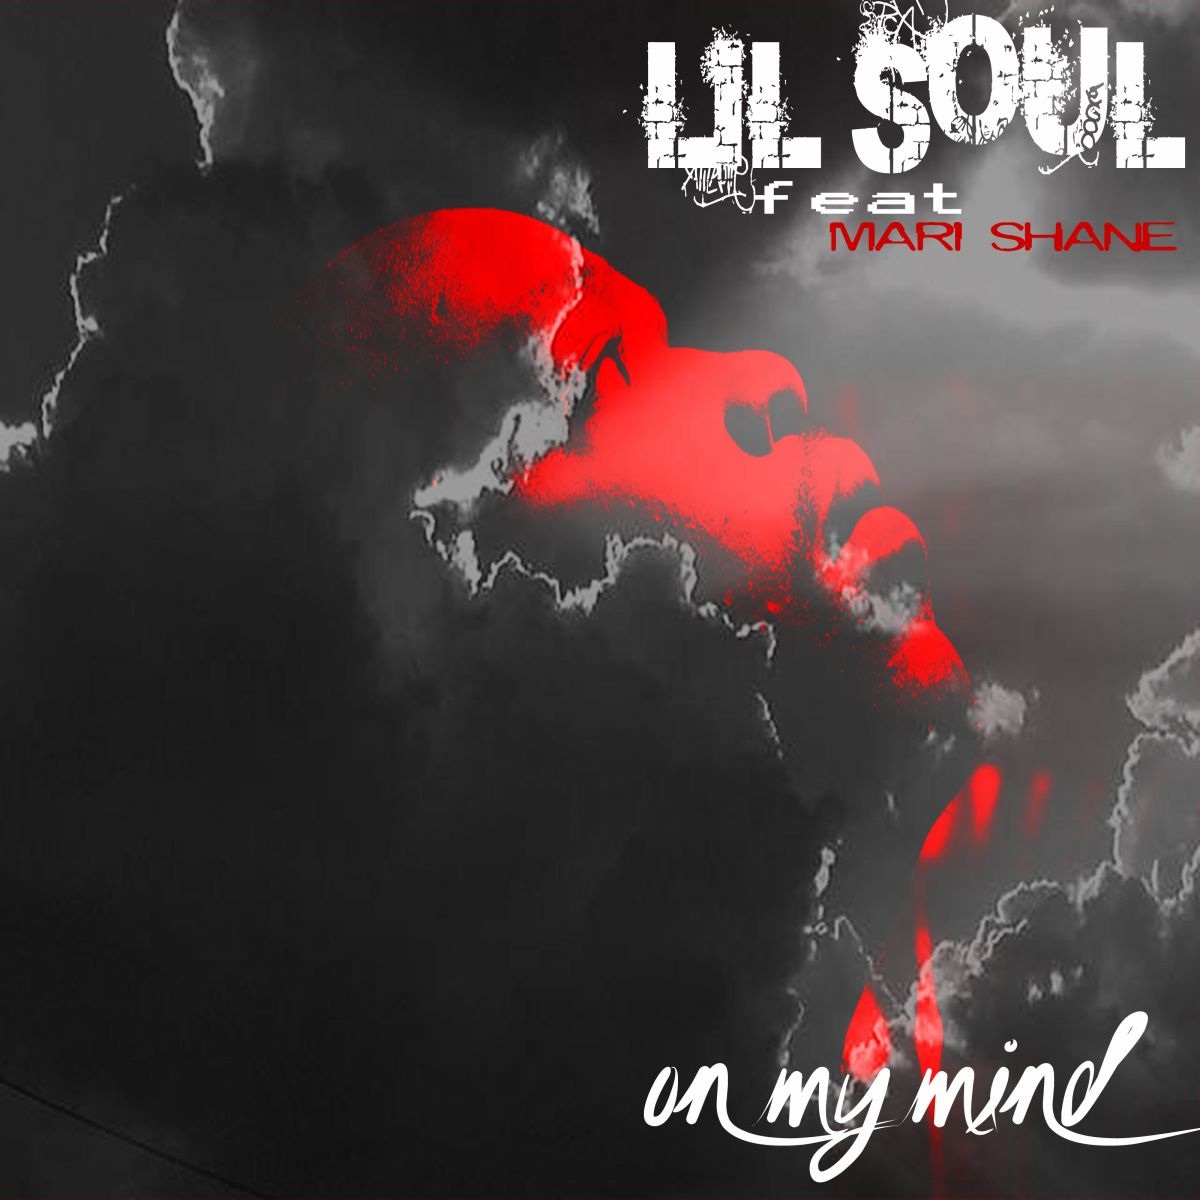 Lil Soul - On My Mind / Inercircle Recordings